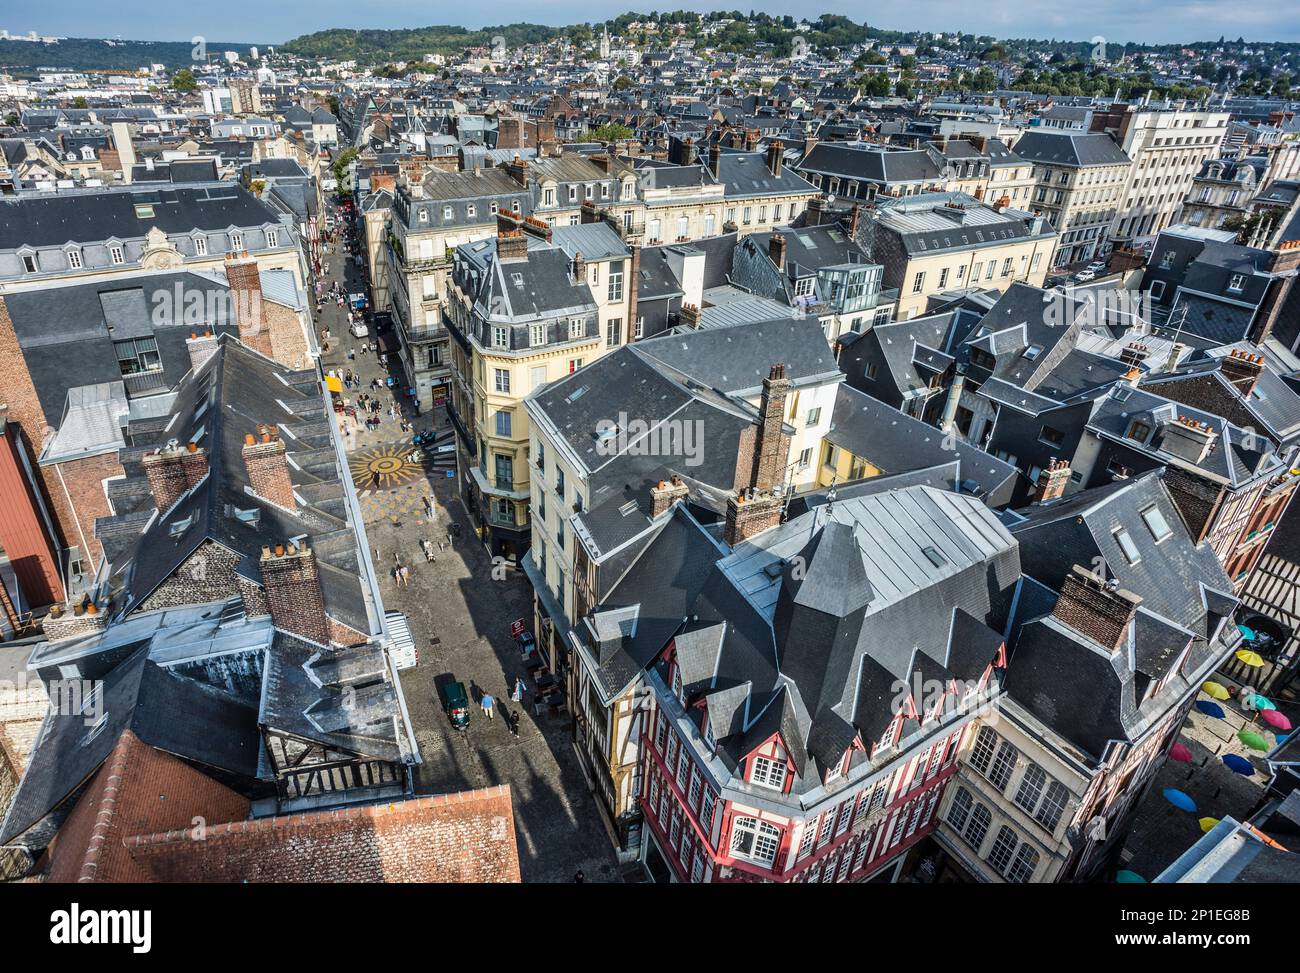 view over the roofs of Rouen from the belfry of the Gros Horloge, the Graet Clock,  looking into Rue du Gros-Horloge, Rouen, Normandy, France Stock Photo